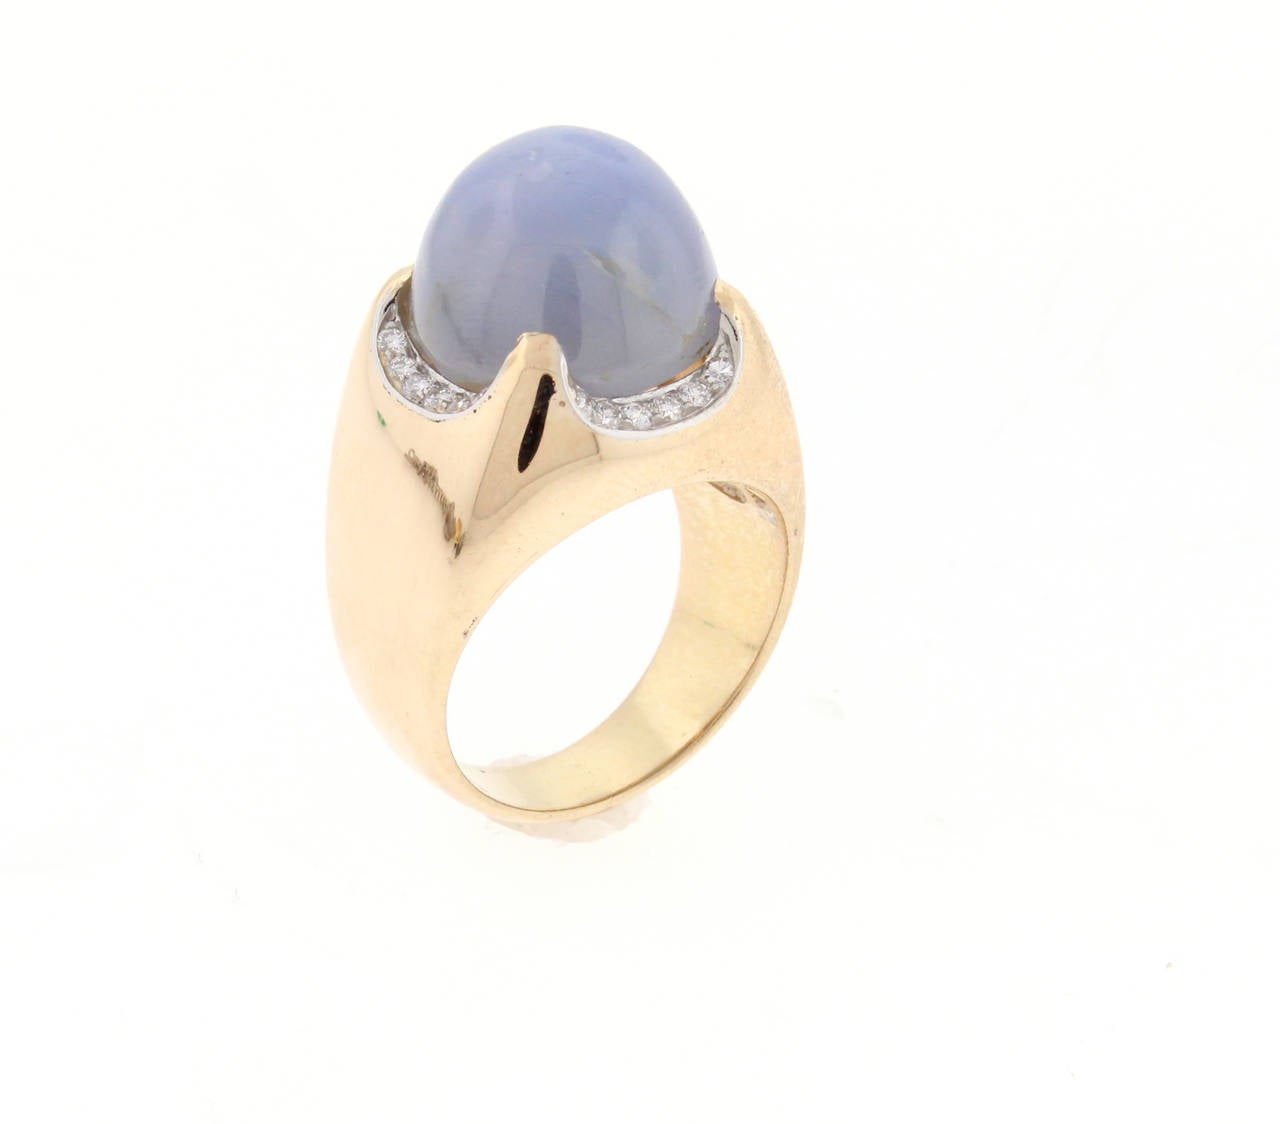 The cabochon greyish blue star sapphire weighs approximately 26 carats and is framed with 24 brilliant diamonds weighing .24 carats. Crafted in 18 karat pink gold the ring exemplifies Bulgari's sophisticated design and style. size 9 can be resized